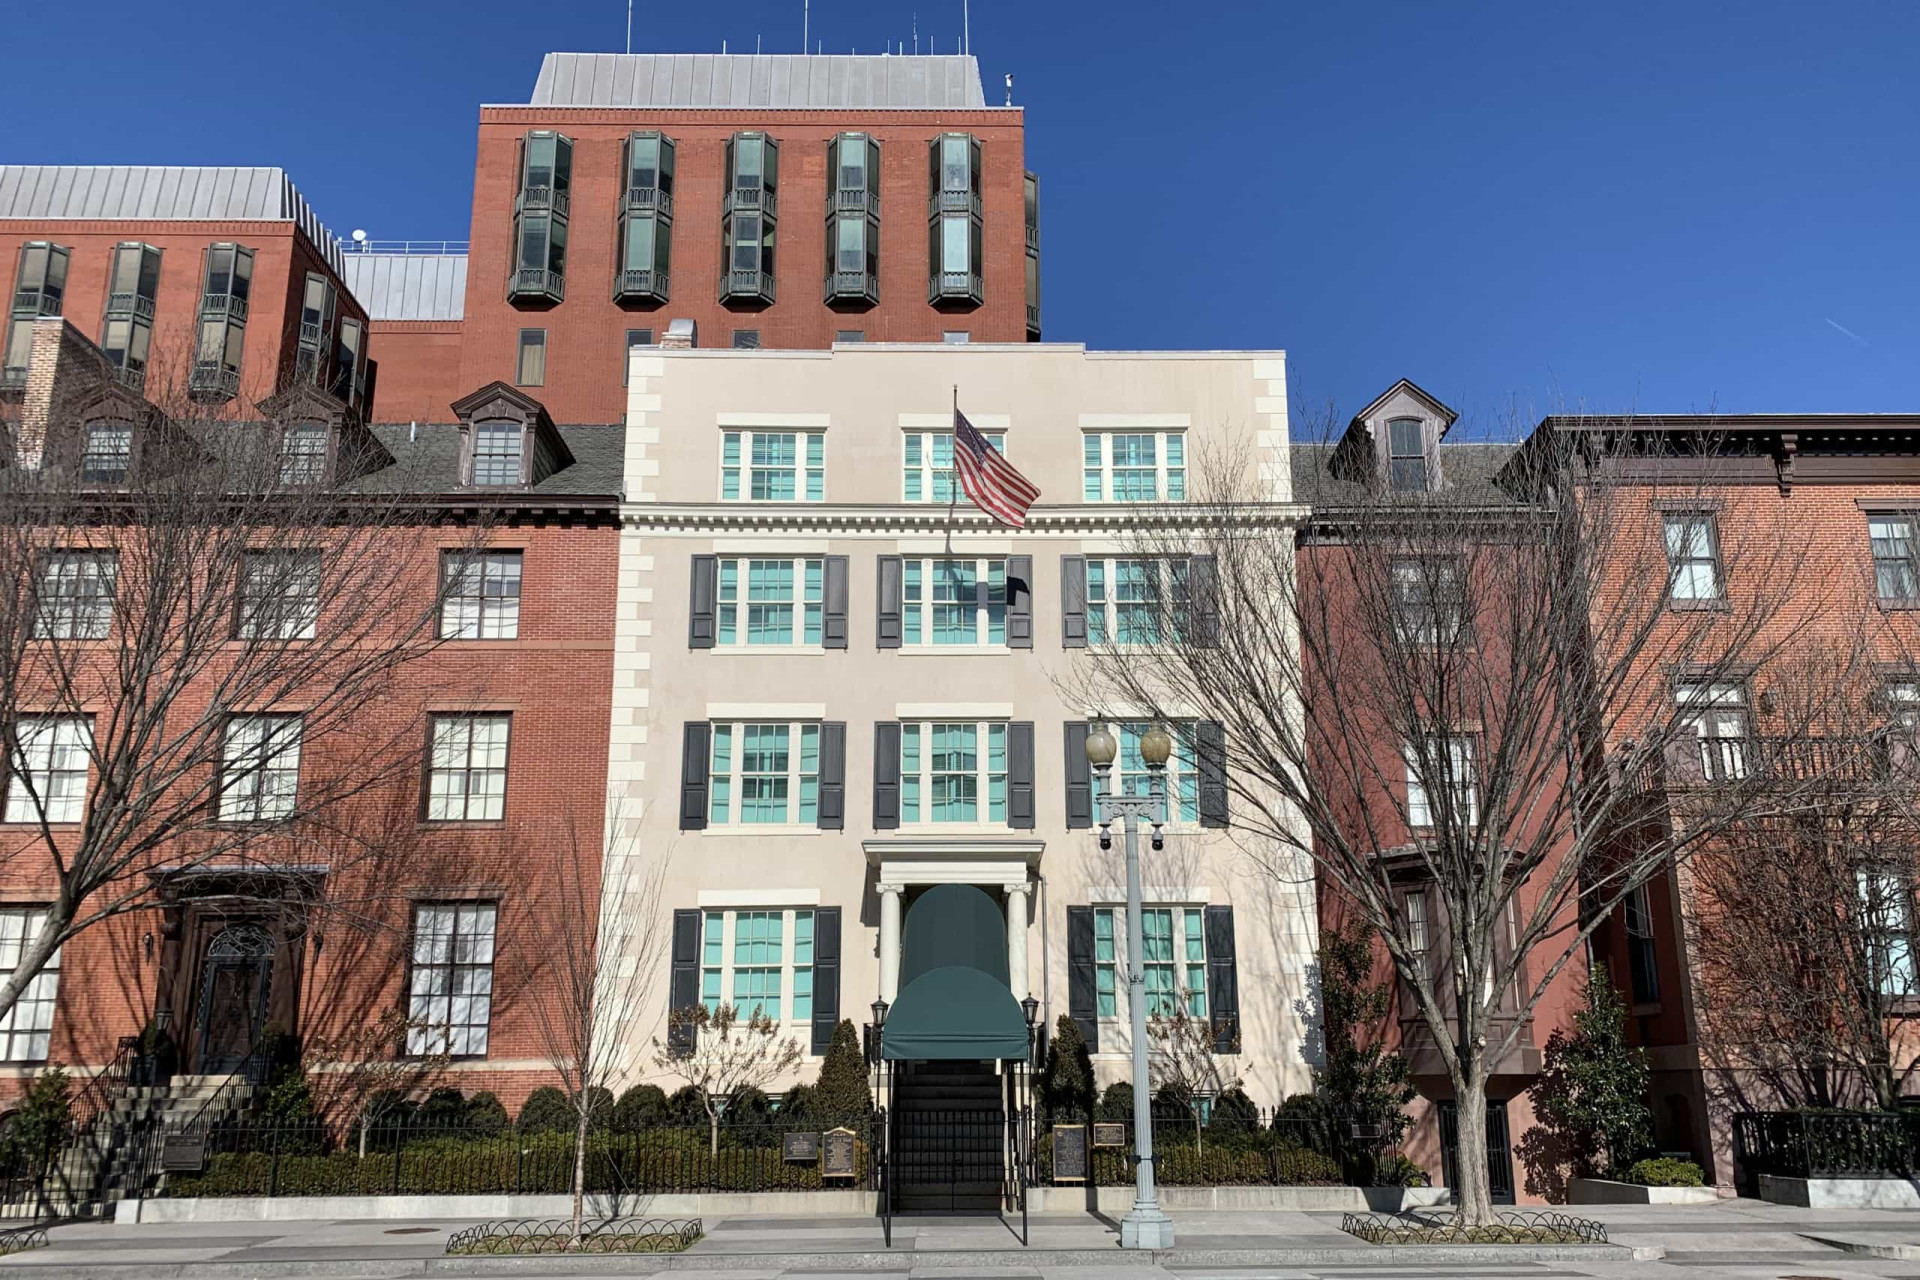 <p>Jimmy and Rosalynn Carter started the tradition of spending the night before inauguration at Blair House, which is located opposite the White House.</p><p><a href="https://www.msn.com/en-us/community/channel/vid-7xx8mnucu55yw63we9va2gwr7uihbxwc68fxqp25x6tg4ftibpra?cvid=94631541bc0f4f89bfd59158d696ad7e">Follow us and access great exclusive content every day</a></p>